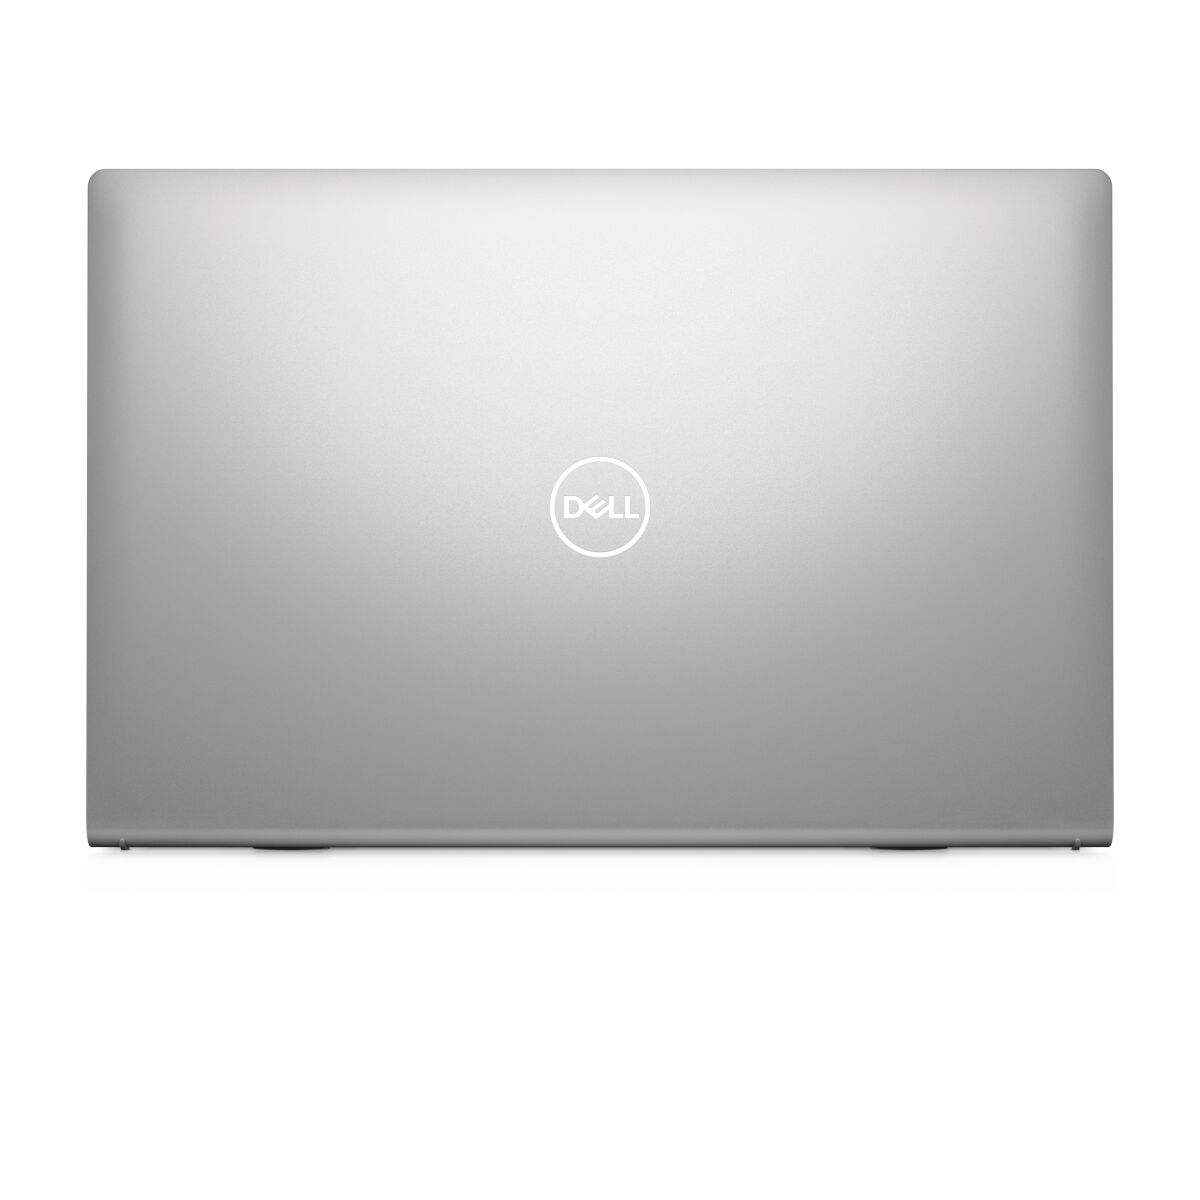 DELL Inspiron 5415 - 5415-5363 laptop specifications